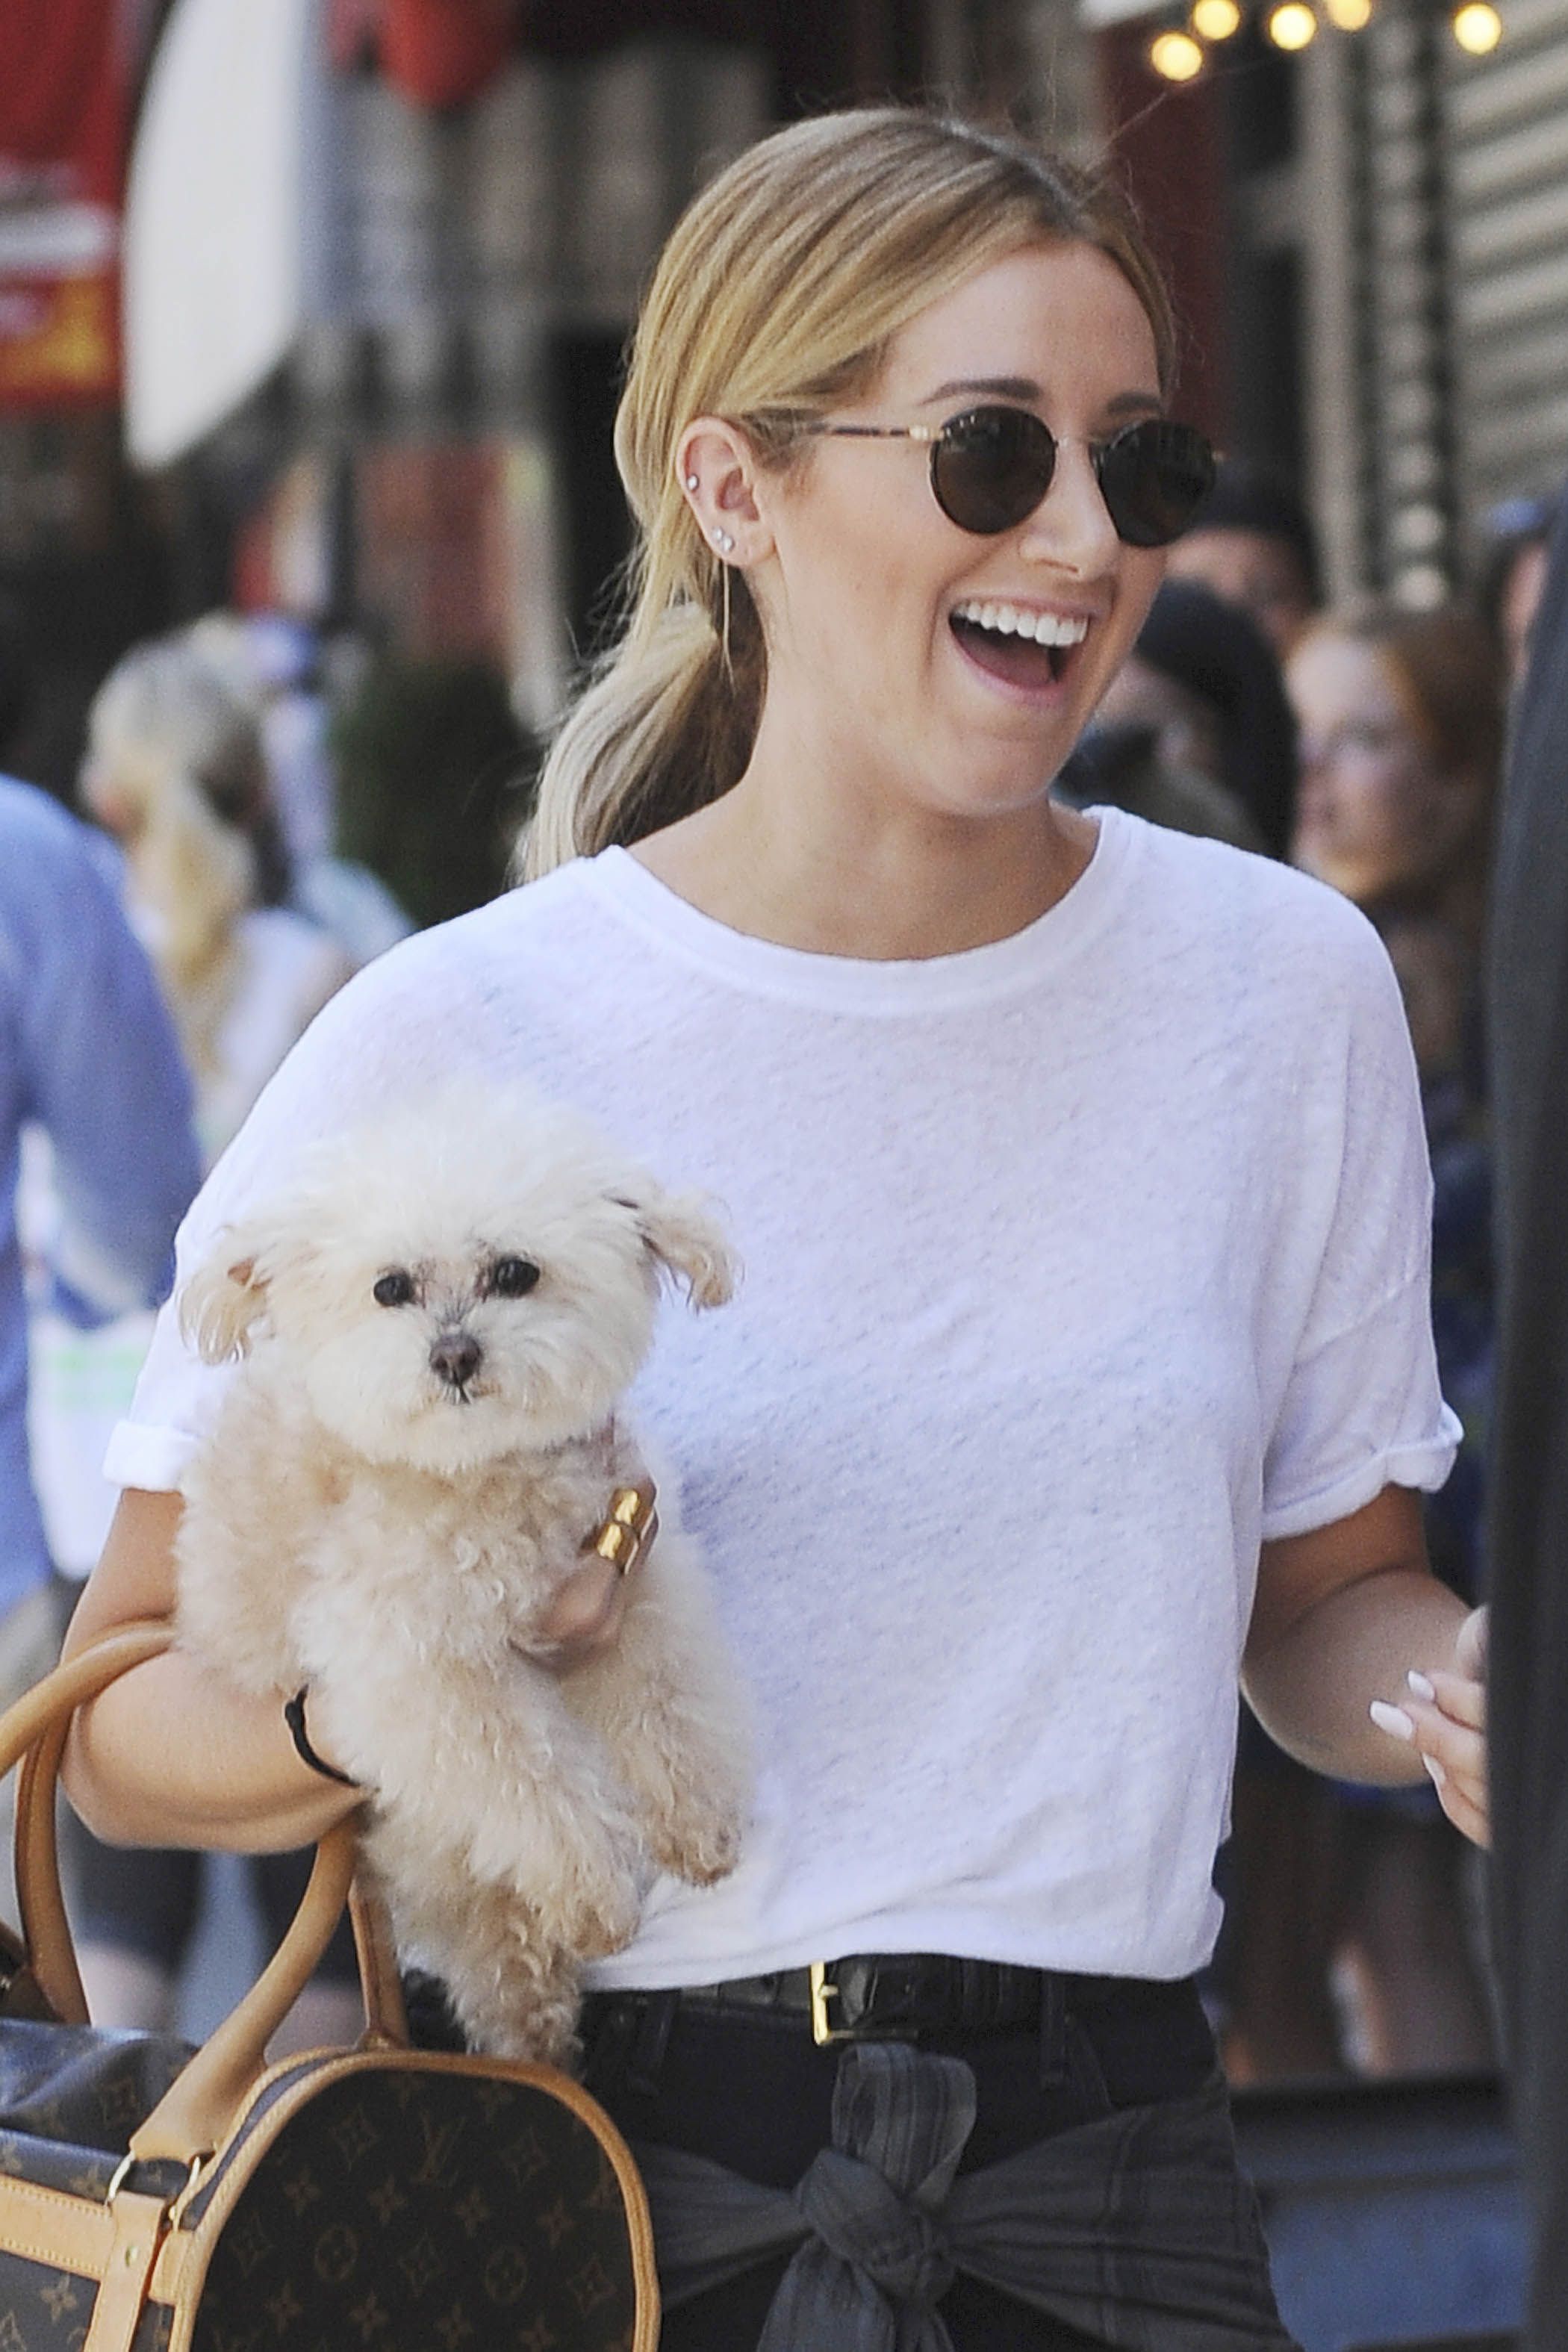 Ashley Tisdale walking in the street while carrying her Bichon Frise.